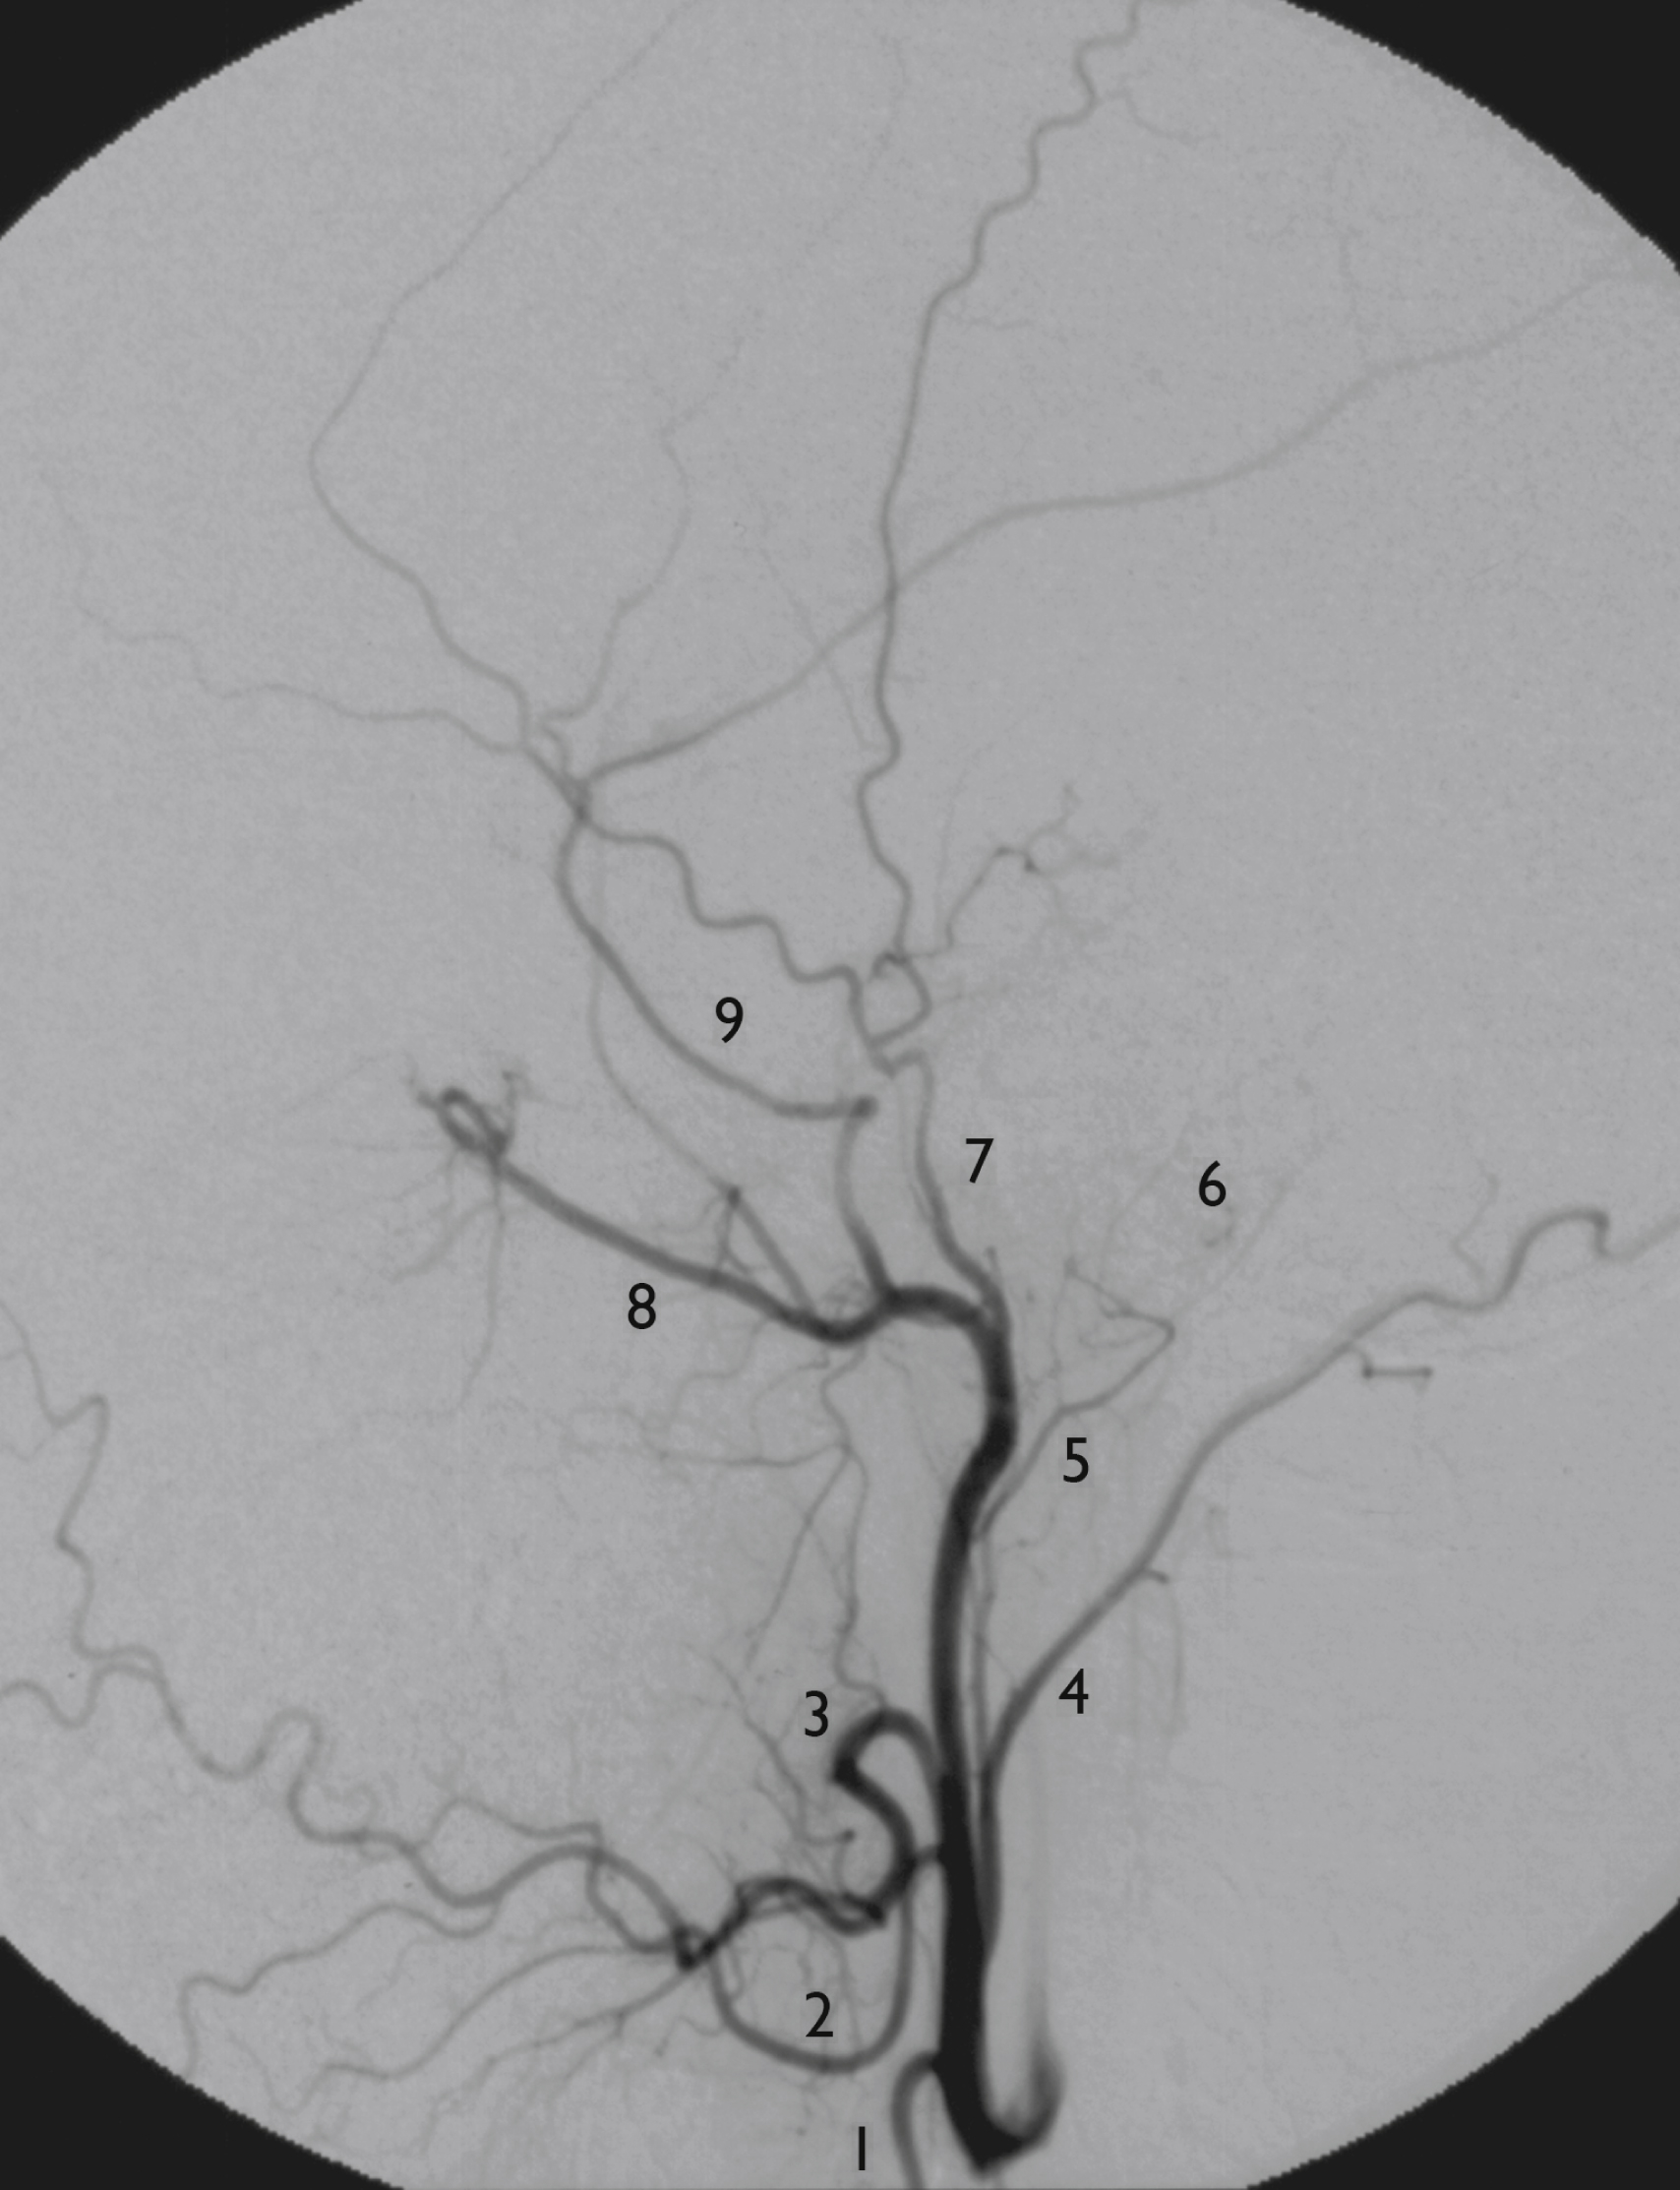 Fig. 56.2, Digital subtraction angiogram, selective external carotid artery (ECA) injection, lateral view. Main branches of ECA are ( 1 ) superior thyroid artery, ( 2 ) lingual artery, ( 3 ) facial artery, ( 4 ) occipital artery, ( 5 ) ascending pharyngeal artery, and ( 6 ) posterior auricular artery. ECA terminates in ( 7 ) superficial temporal artery and ( 8 ) maxillary artery, which provides ( 9 ) middle meningeal artery.